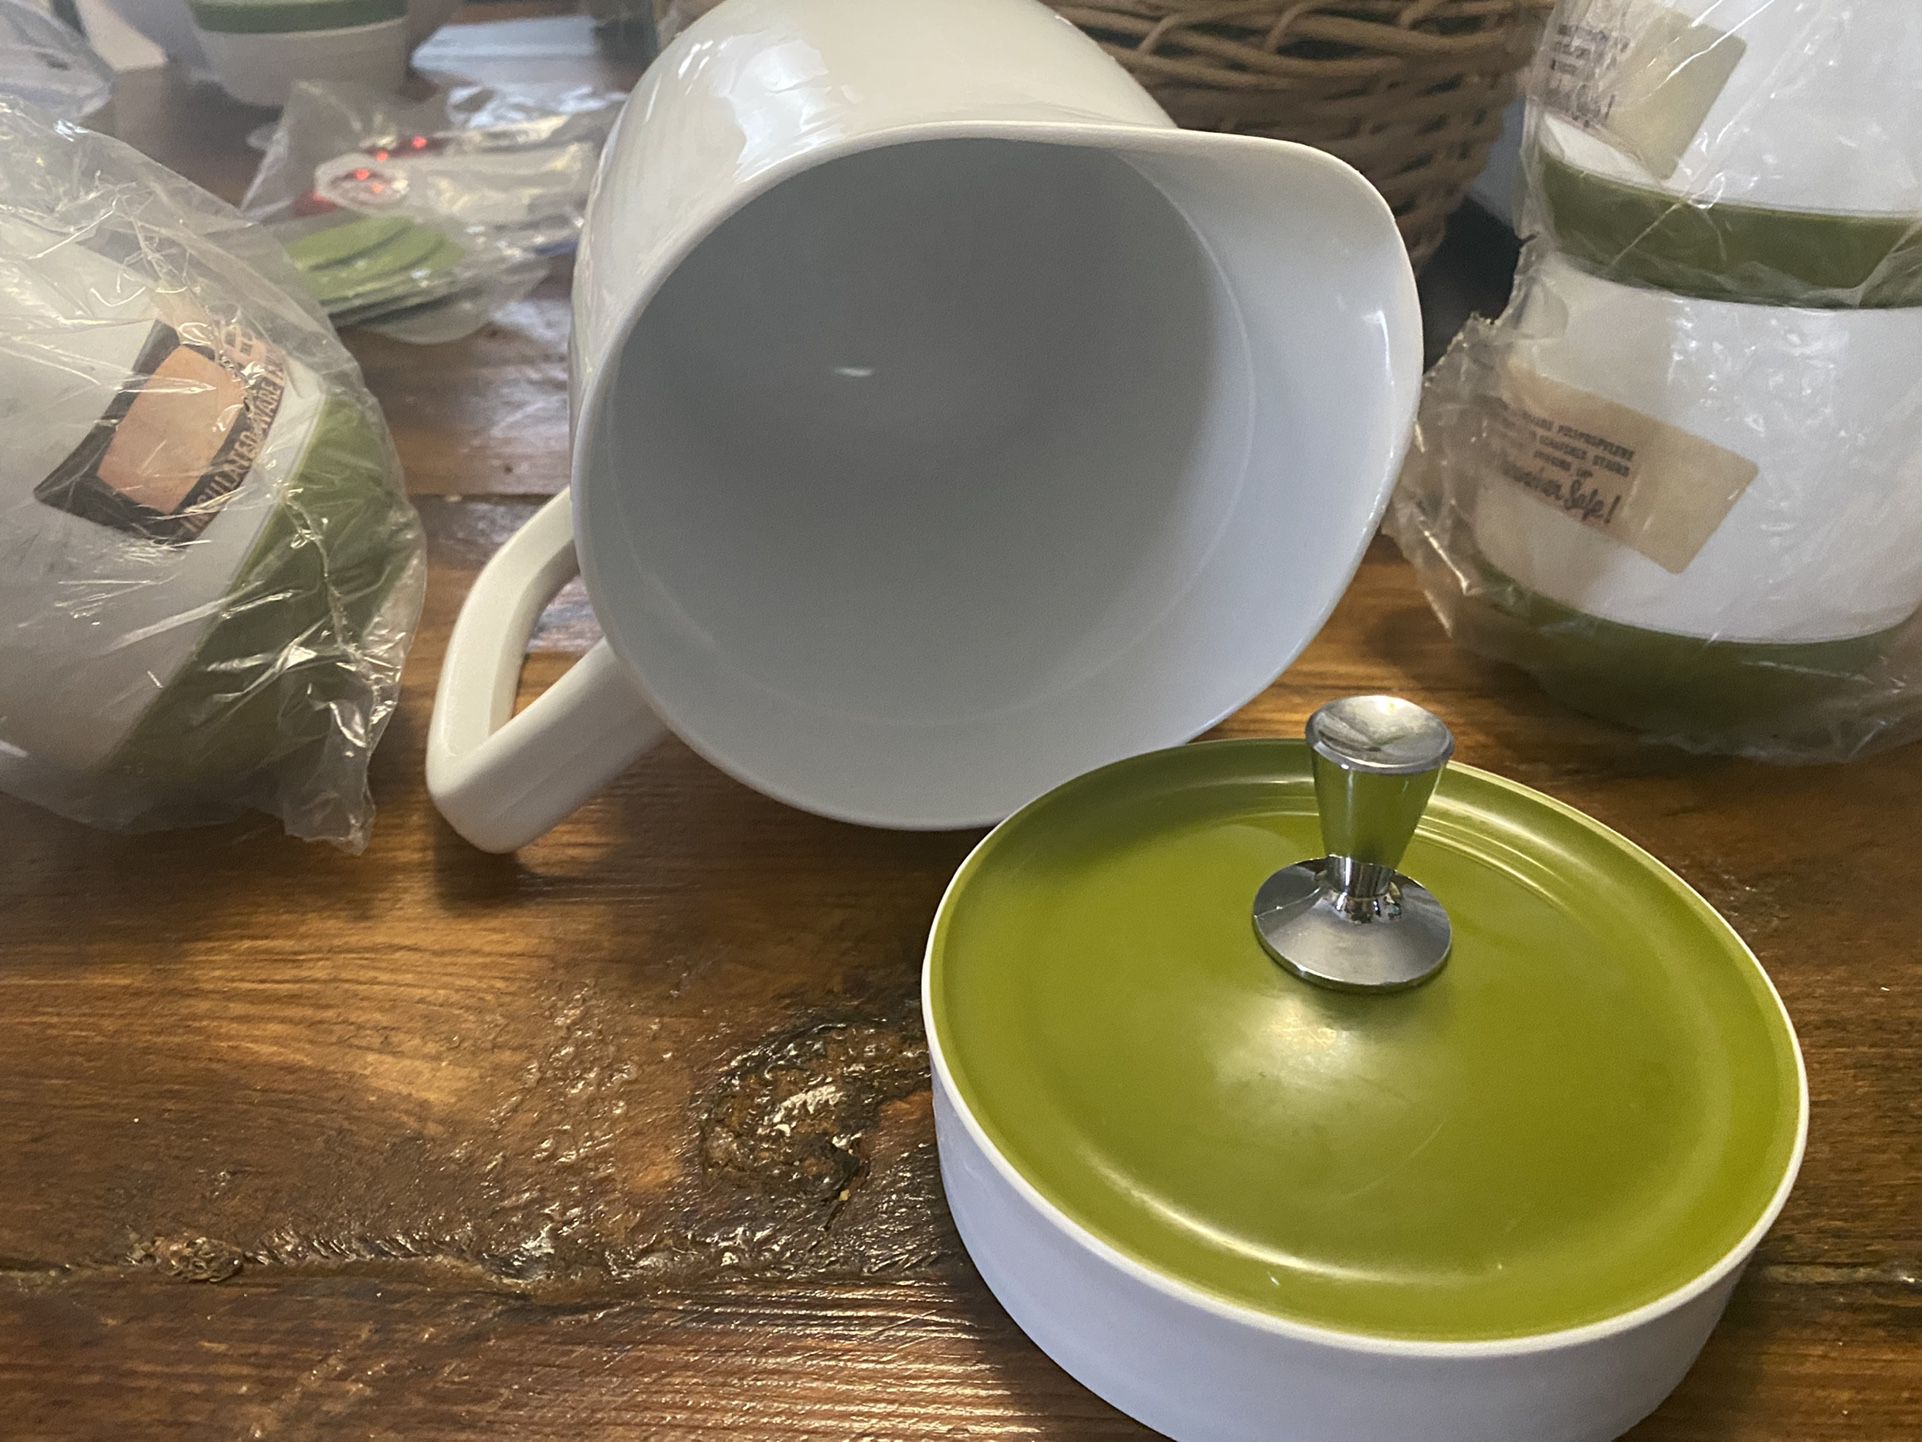  Vtg Thermos Retro Pitcher and 4 cups Insulated Ware King-Seeley USA 8" - avocado.  The 4 cups are still in unopened original packaging. The pitcher a